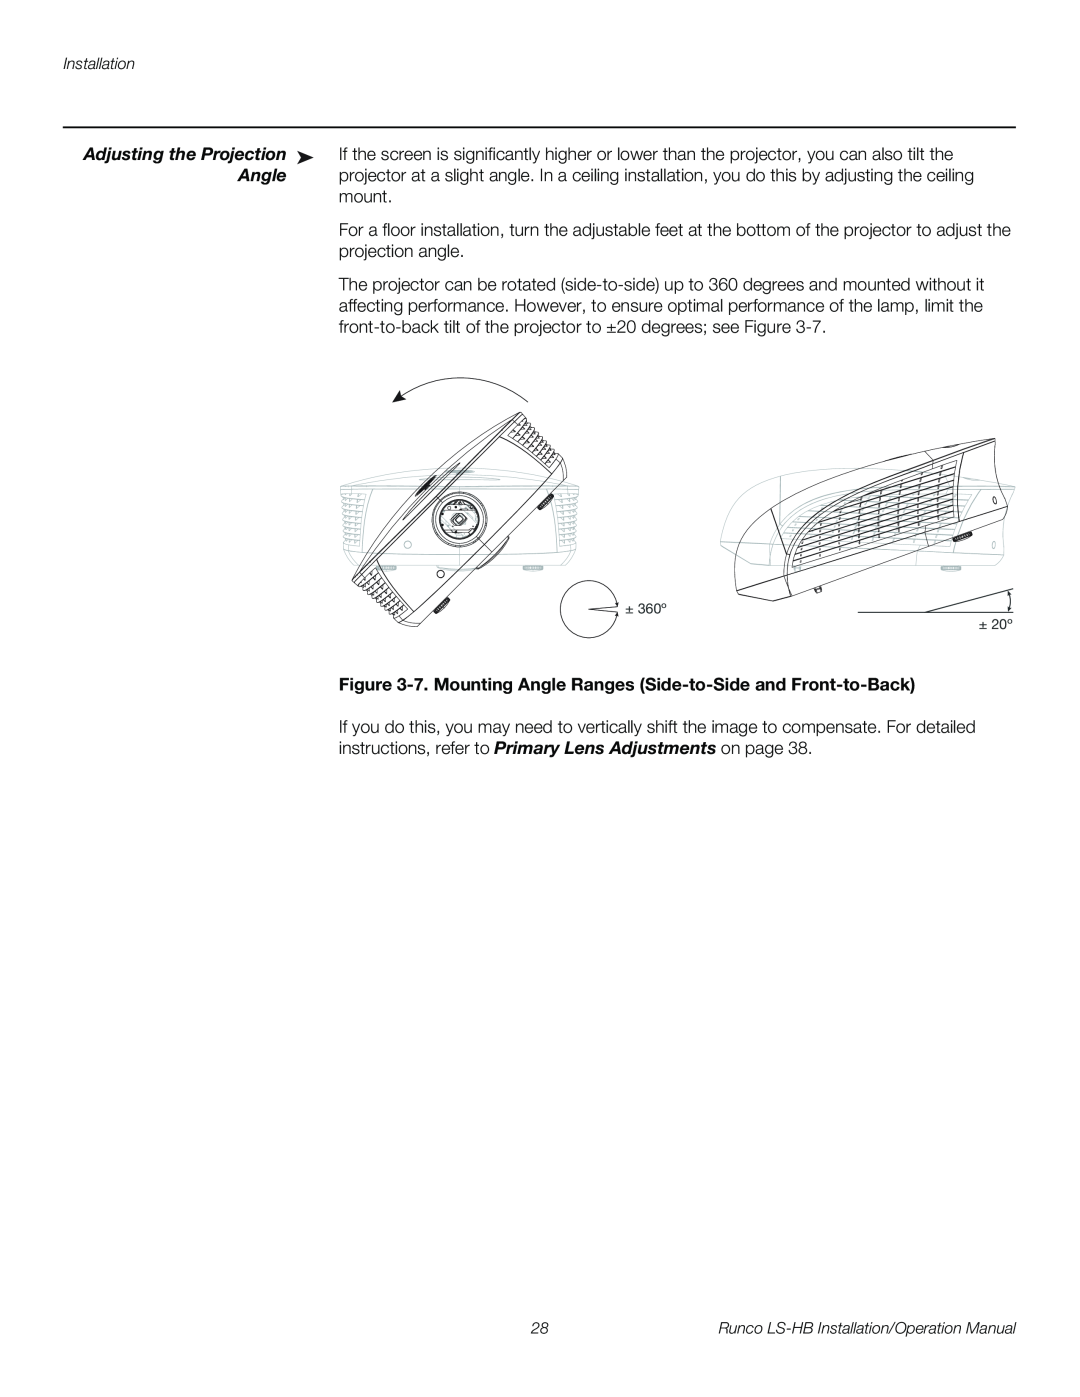 Runco LS-HB operation manual Adjusting the Projection, 7. Mounting Angle Ranges Side-to-Side and Front-to-Back 